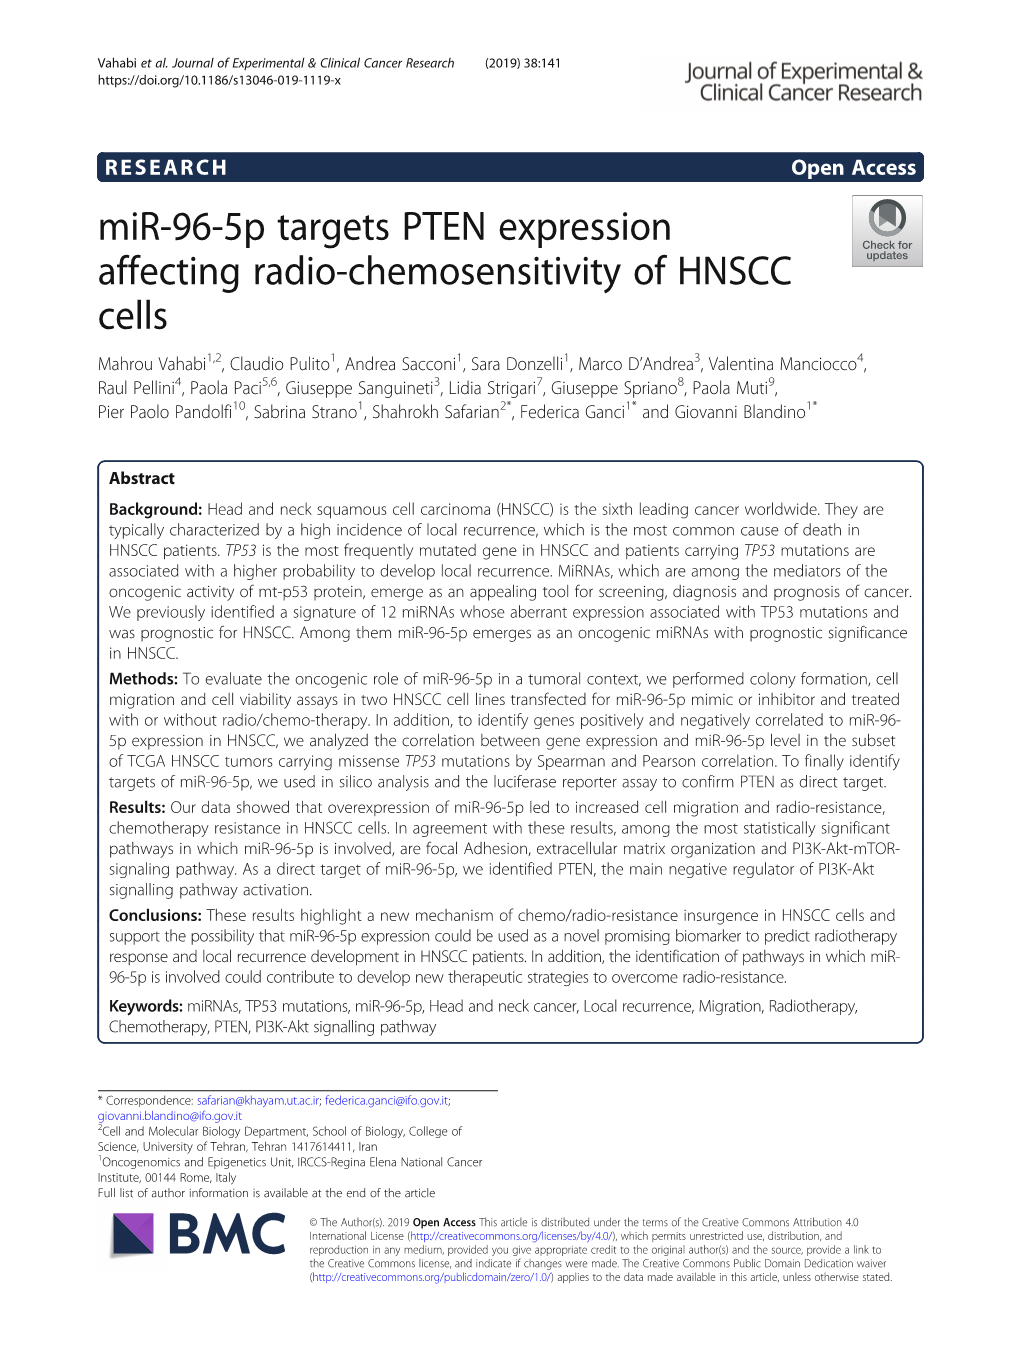 Mir-96-5P Targets PTEN Expression Affecting Radio-Chemosensitivity of HNSCC Cells